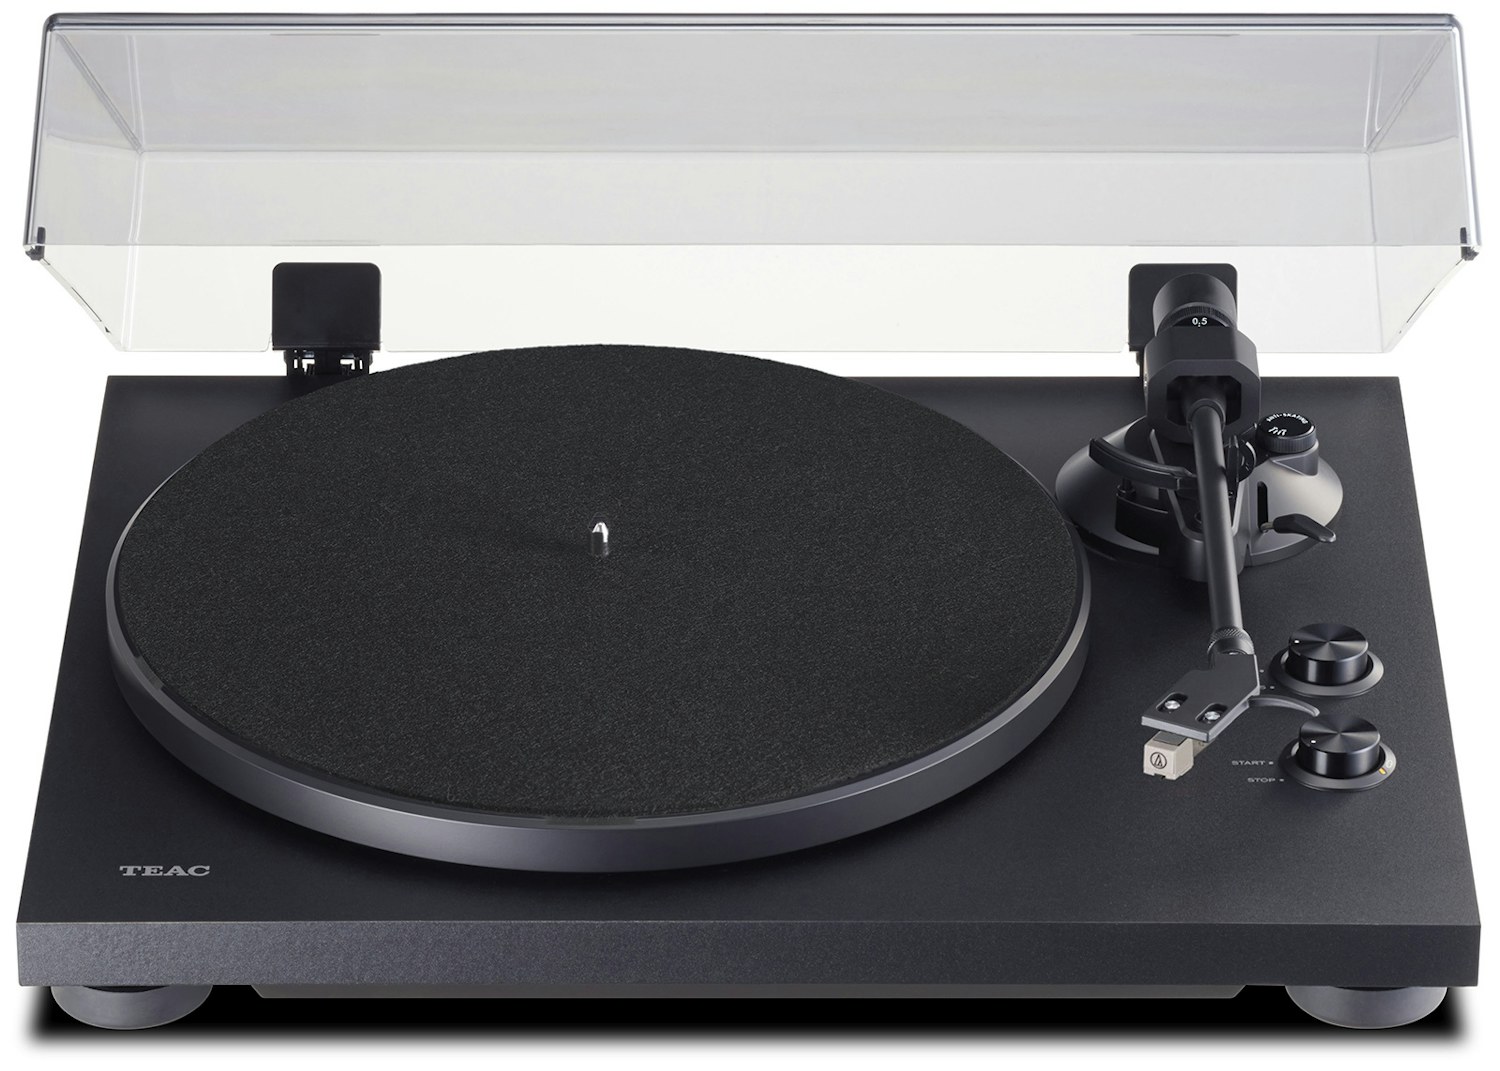 Tn 280bt a3 turntable black front view